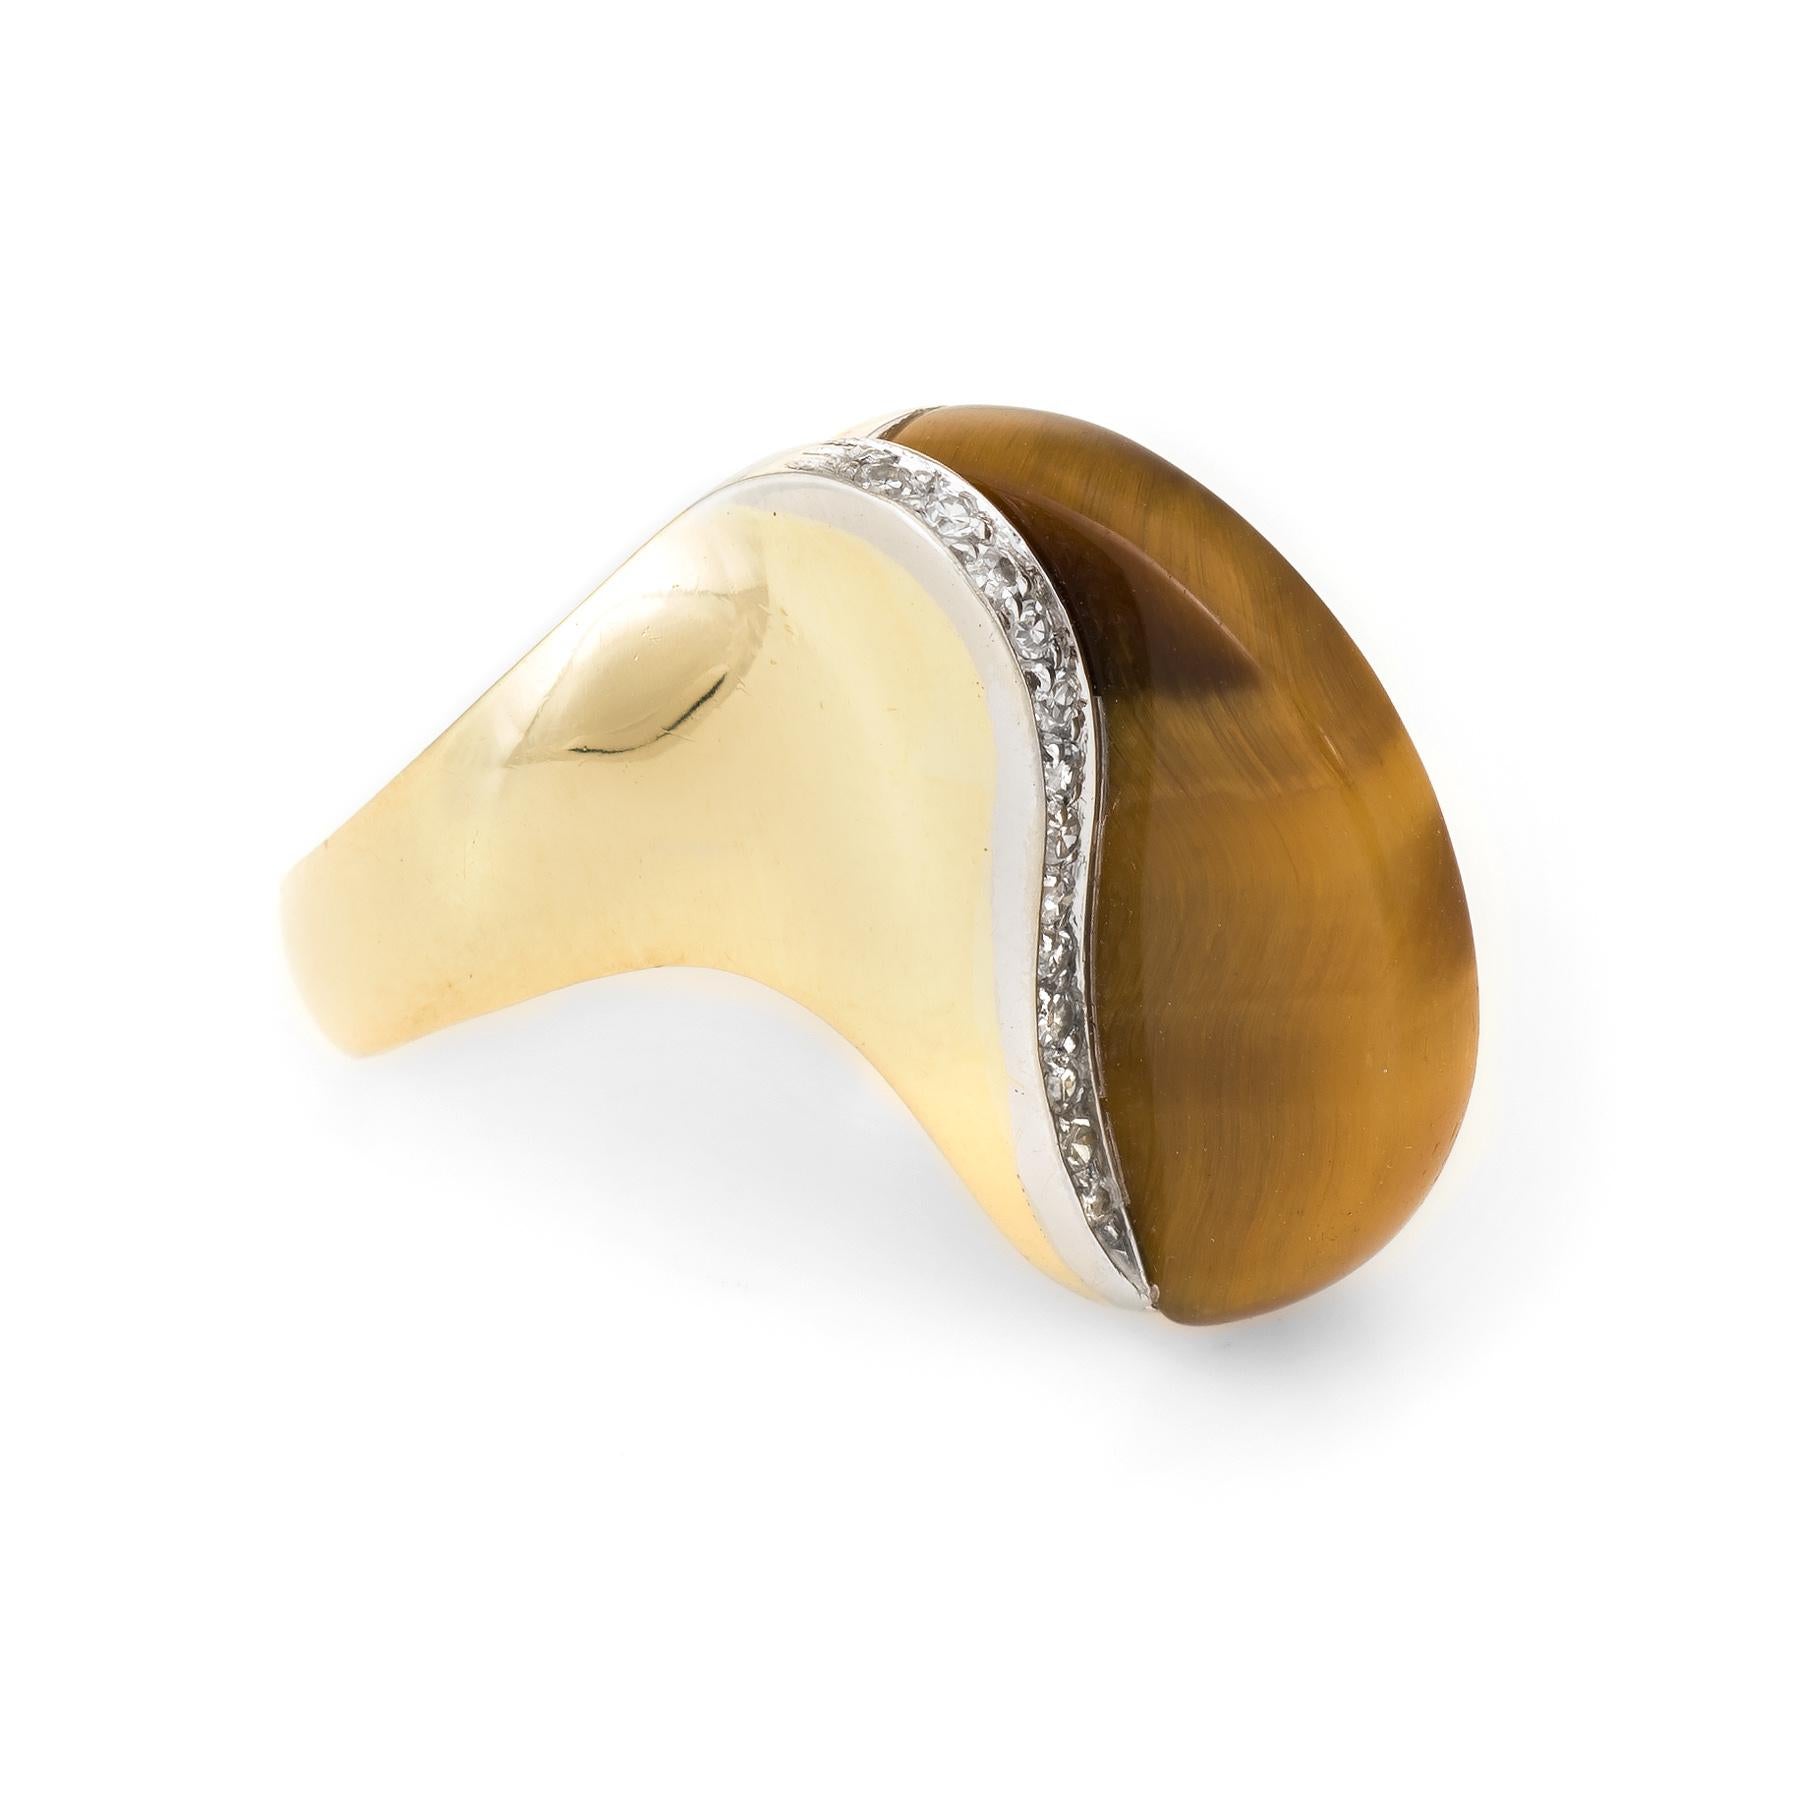 Distinct vintage cocktail ring (circa 1970s), crafted in 18 karat yellow gold. 

Centrally mounted high dome tigers eye measures 21mm x 3mm, accented with an estimated 0.26 carats of diamonds (estimated at G-H color and VS2 clarity). The tigers eye